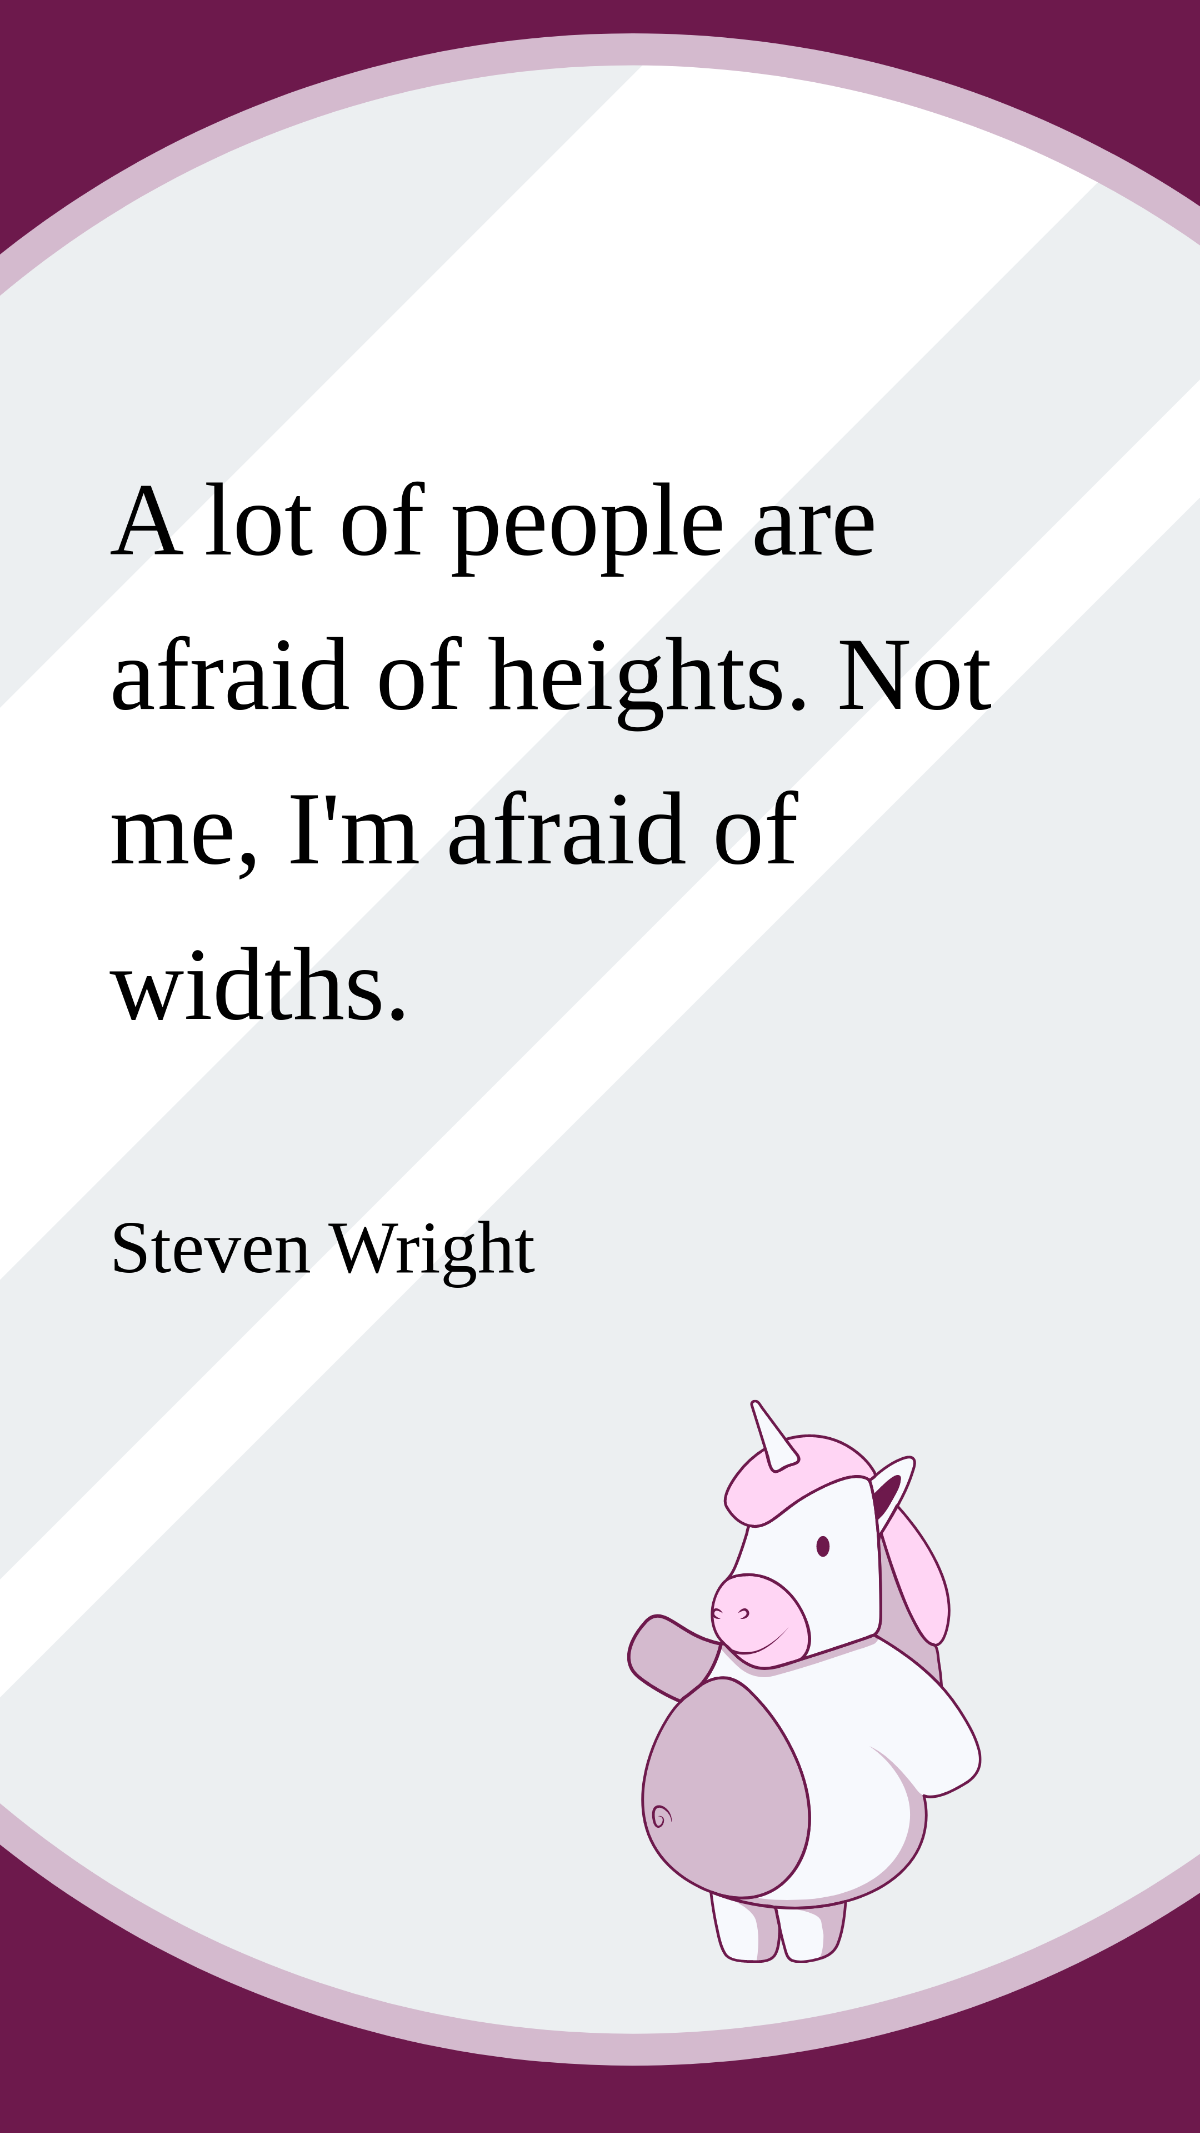 Steven Wright - A lot of people are afraid of heights. Not me, I'm afraid of widths.